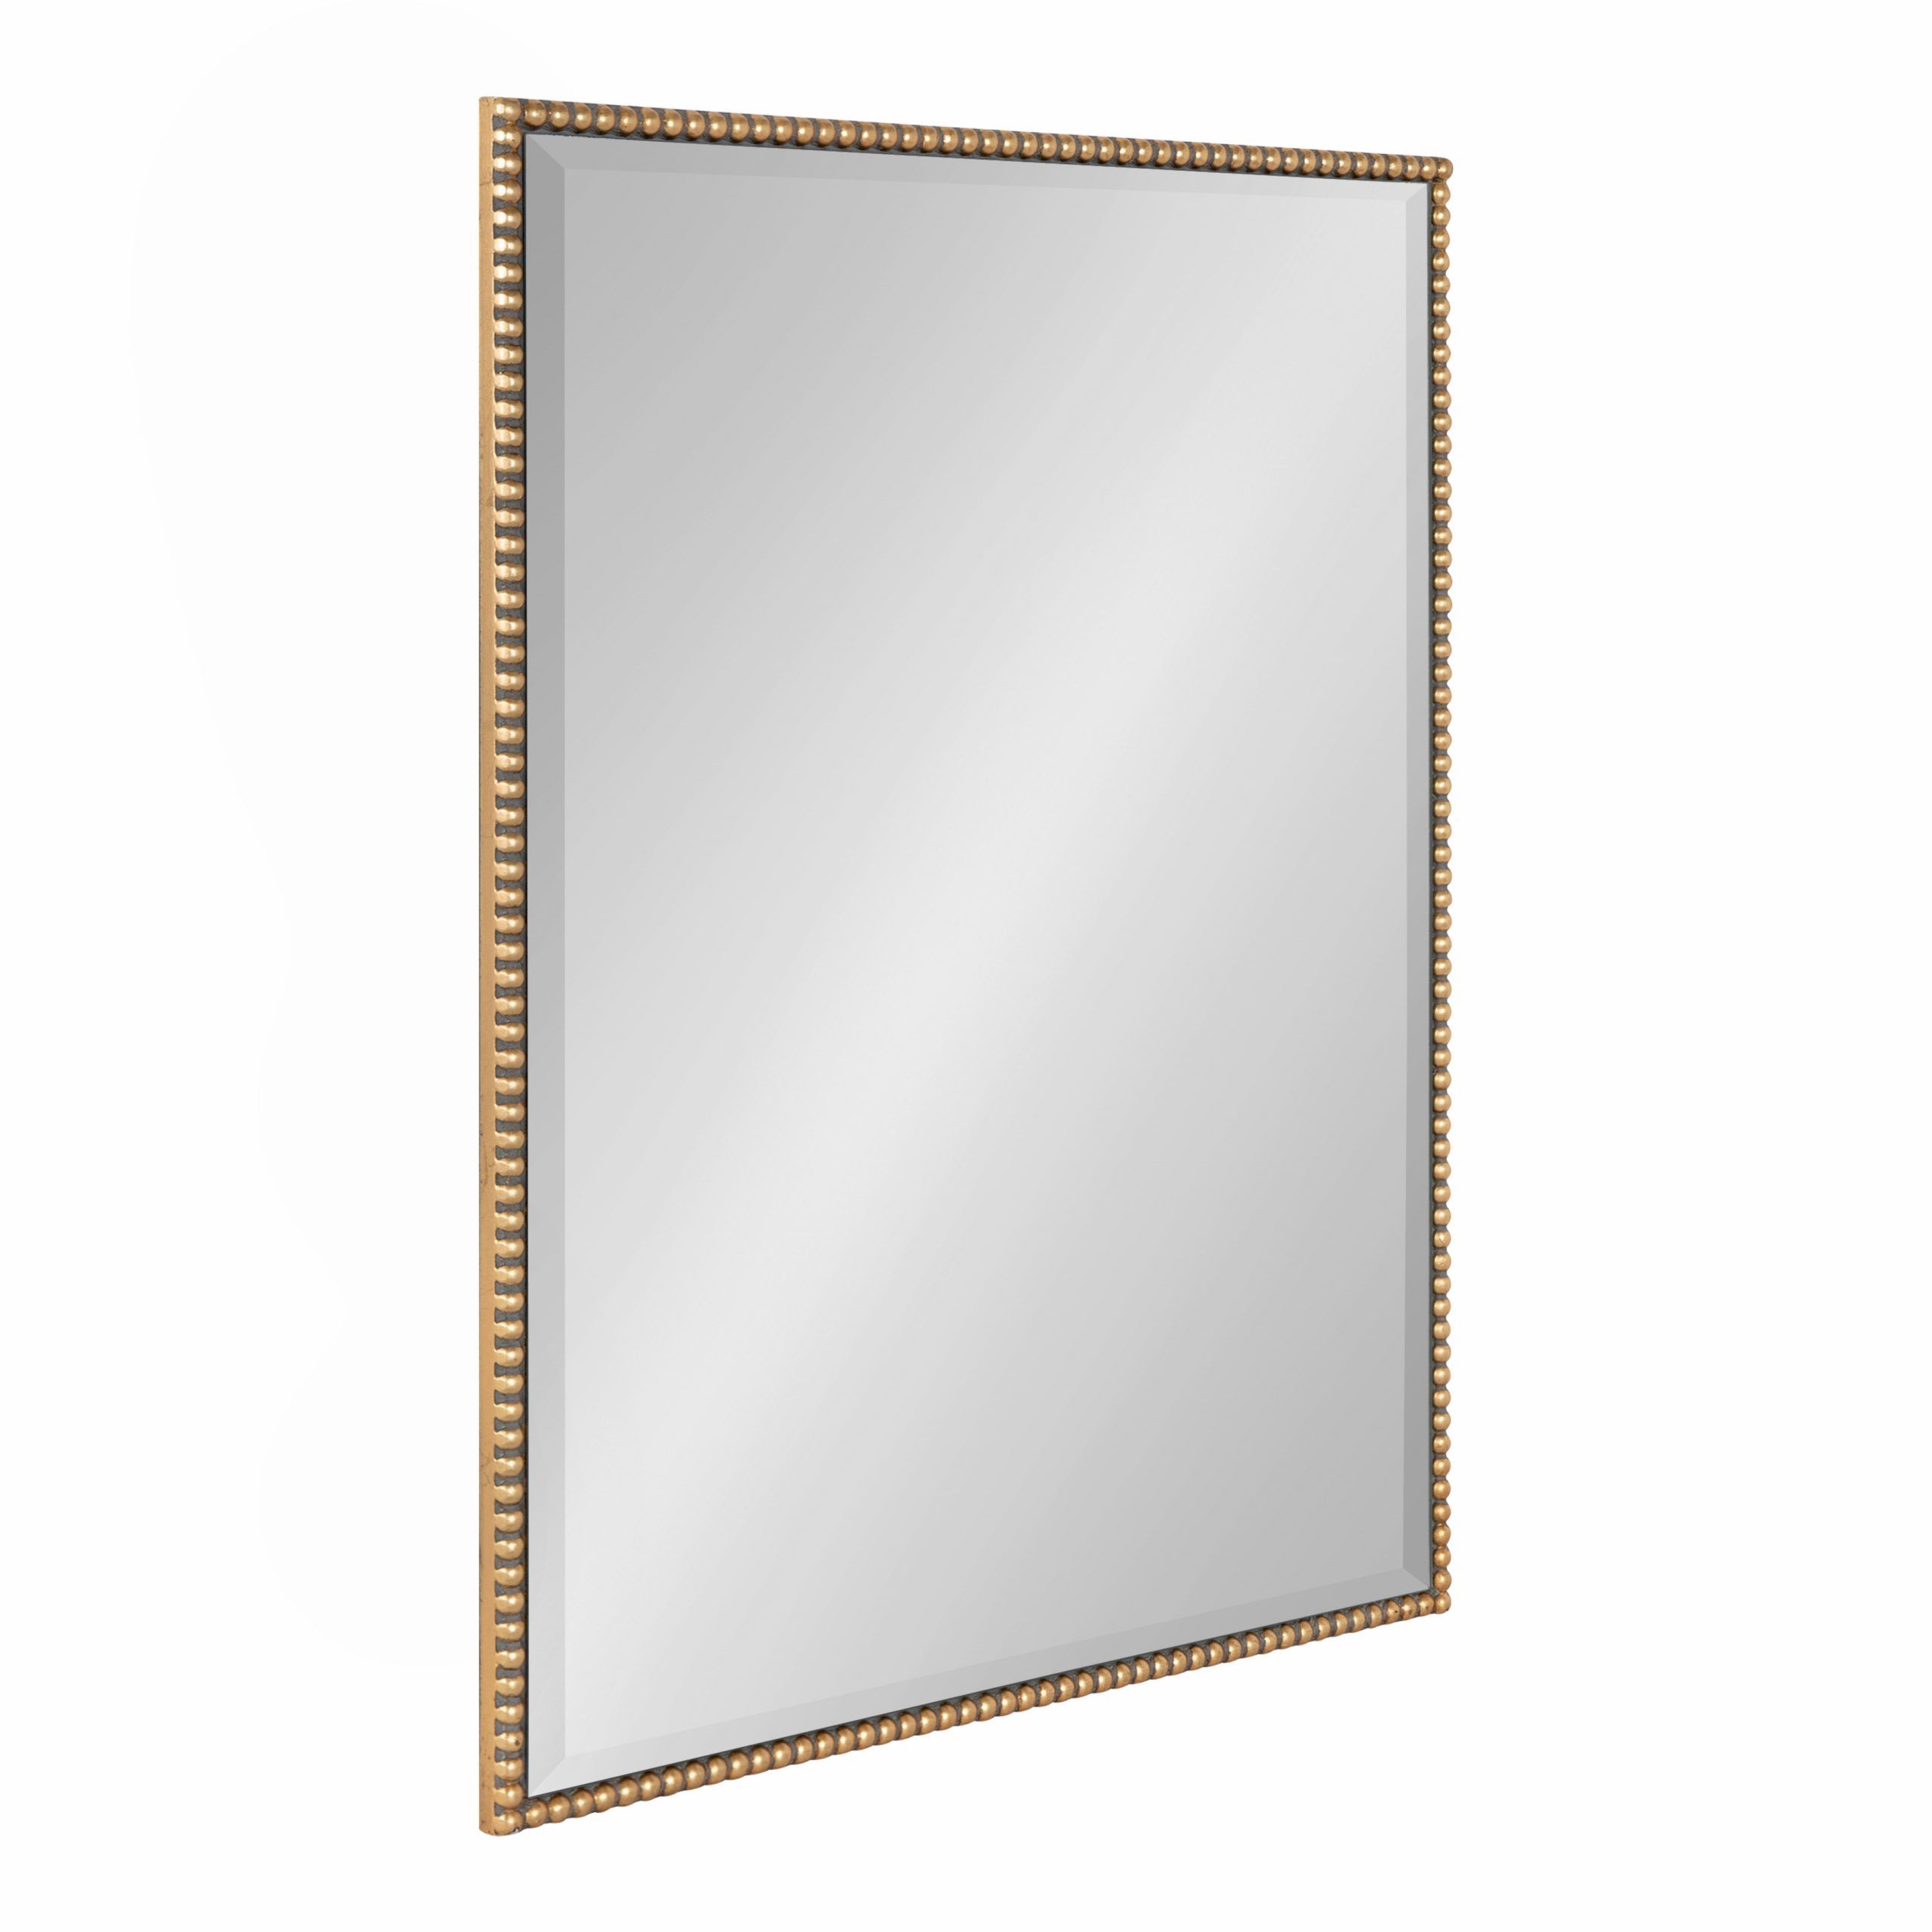 Kate And Laurel Gwendolyn Modern Glam Beaded Framed Rectangle Wall Pertaining To Glam Silver Leaf Beaded Wall Mirrors (View 8 of 15)